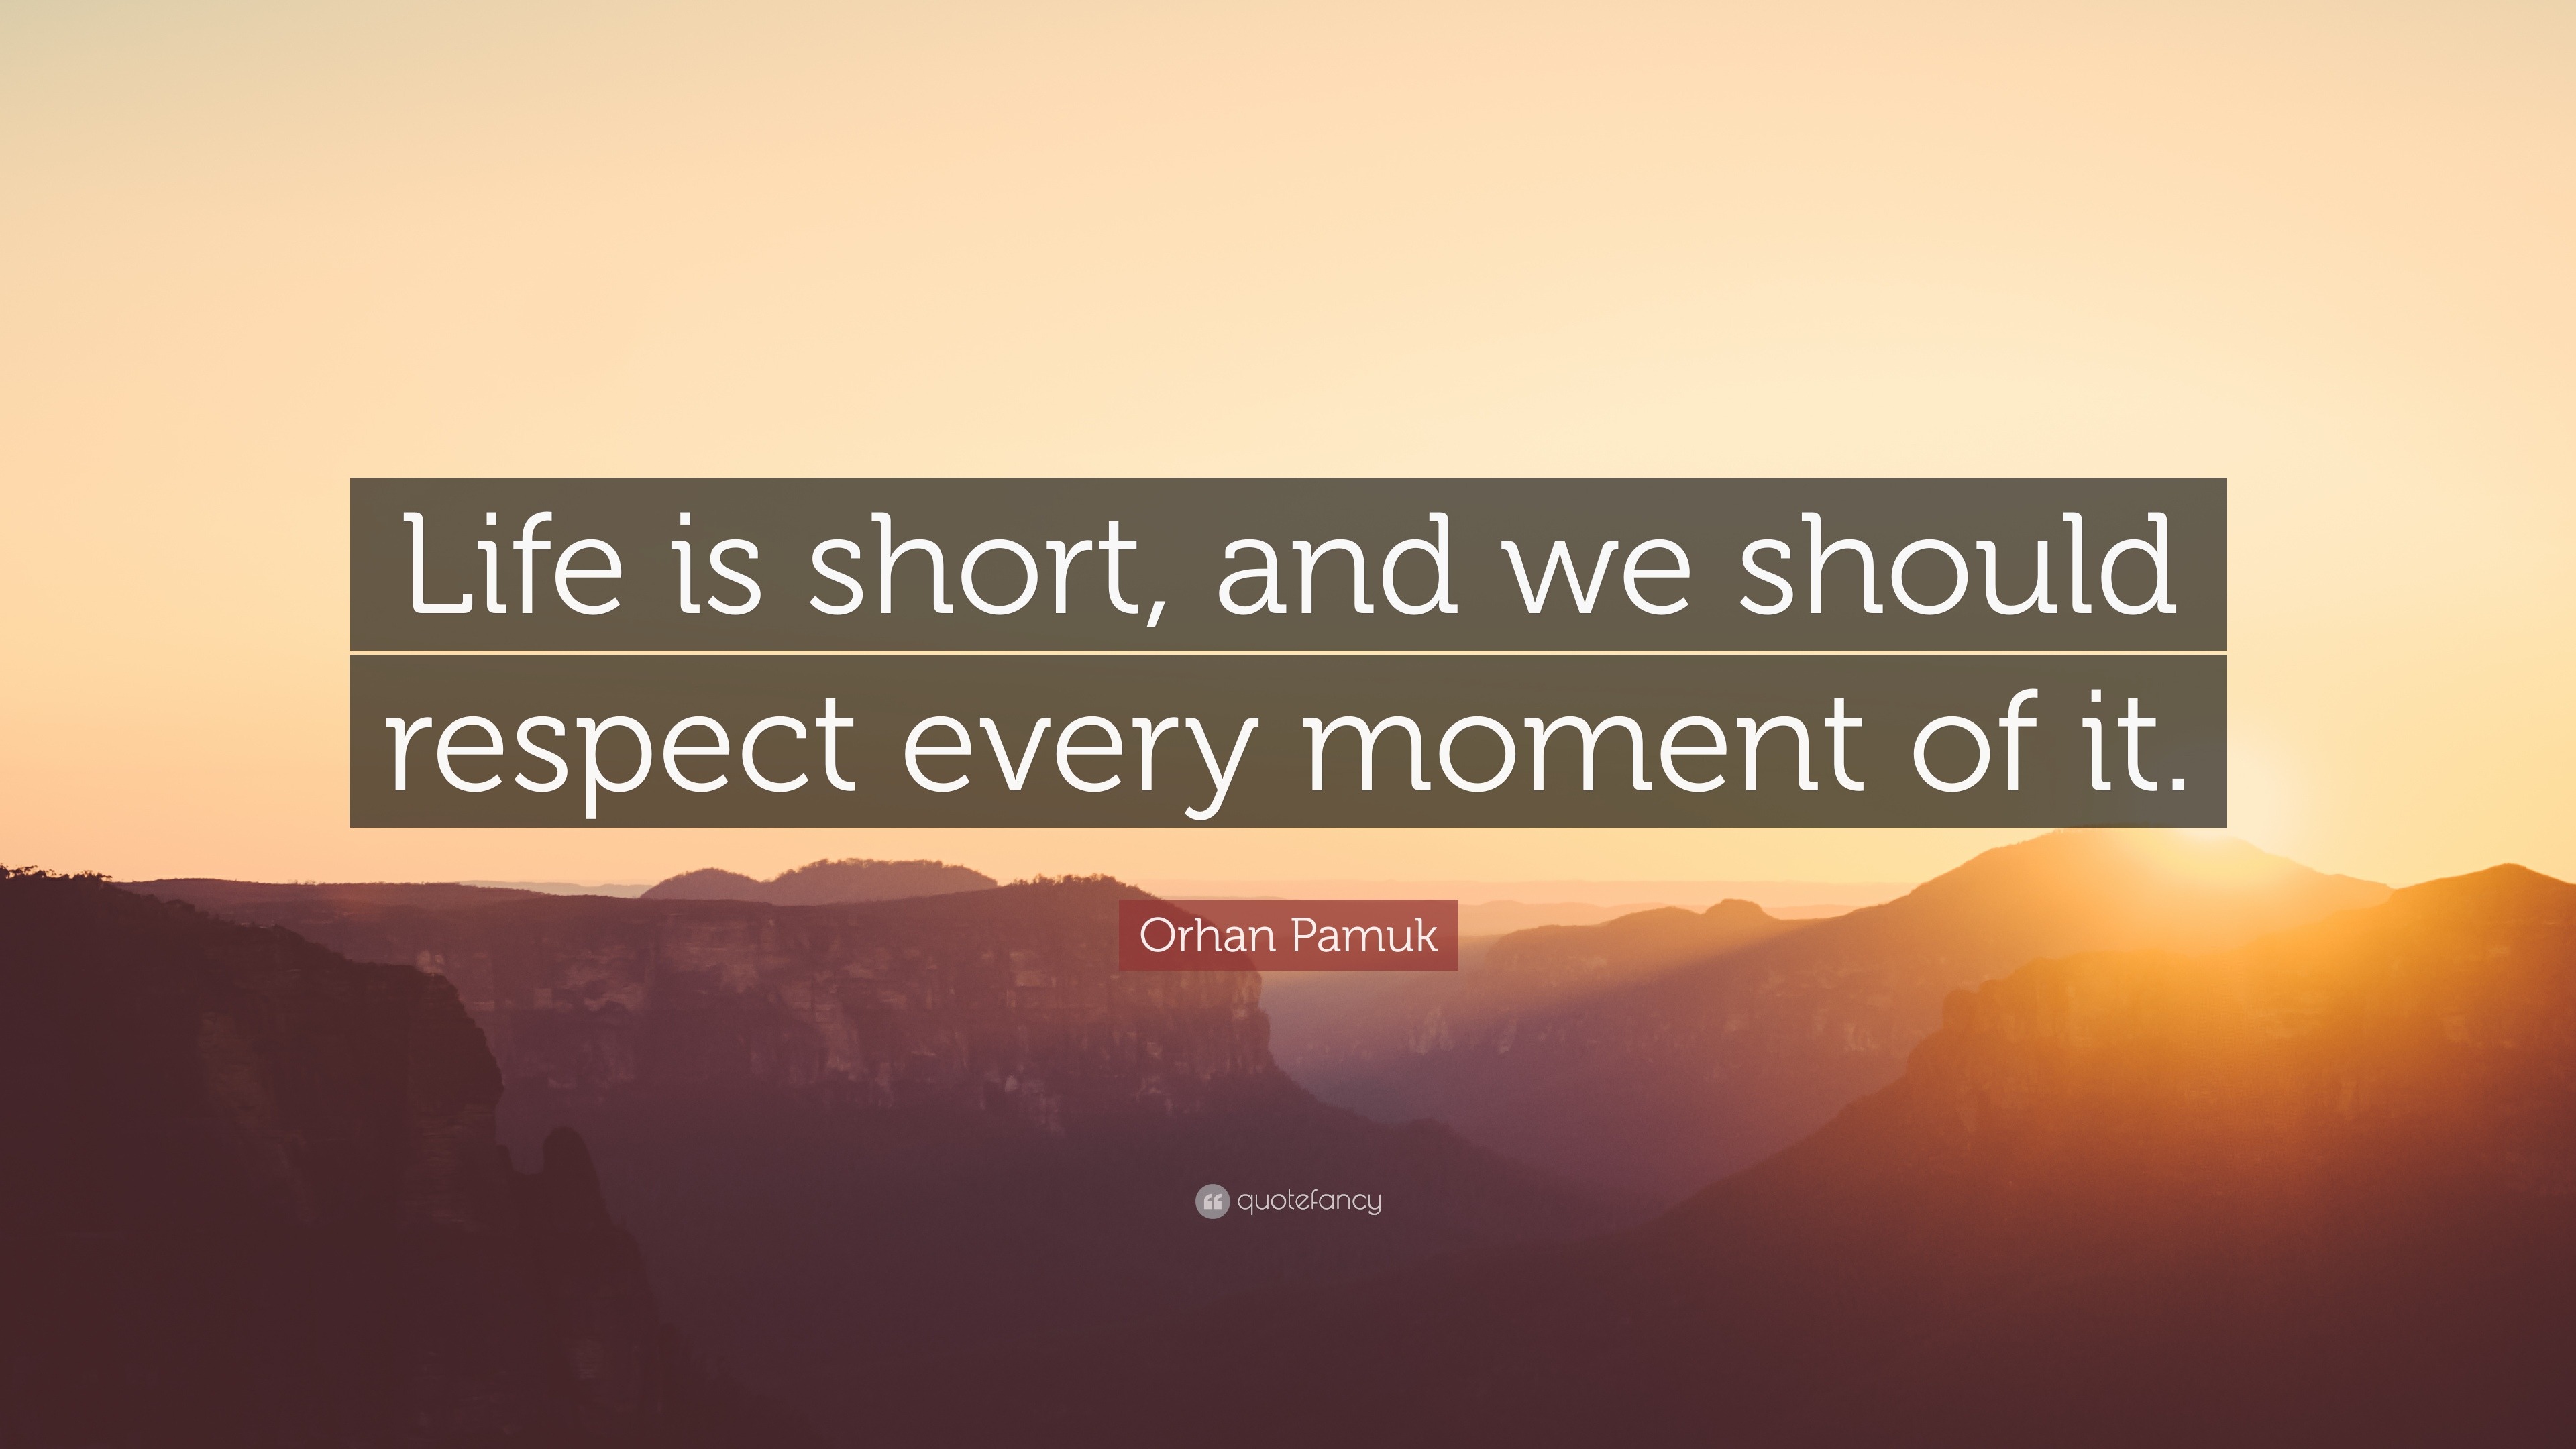 Life Is Short Quotes (40 Wallpapers) - Quotefancy